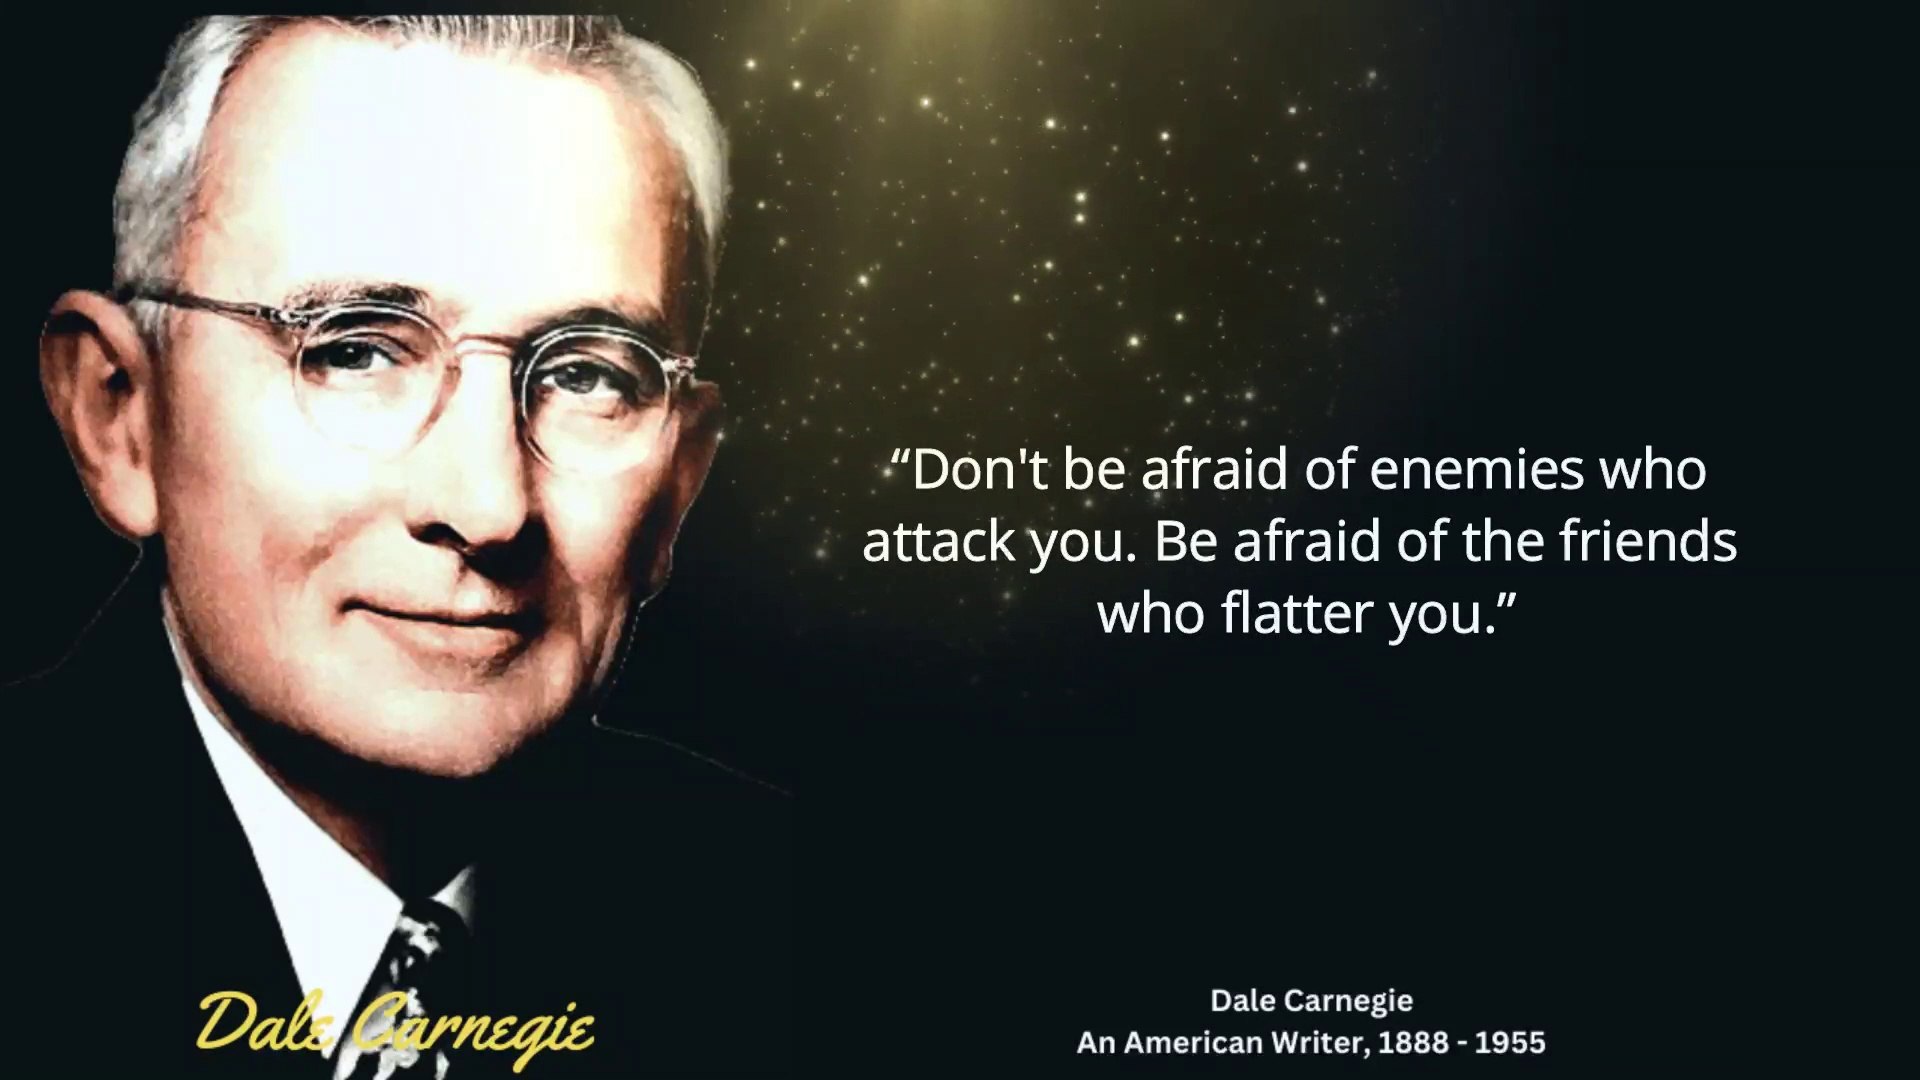 31 Inspiring and Motivating Dale Carnegie Quotes - video Dailymotion